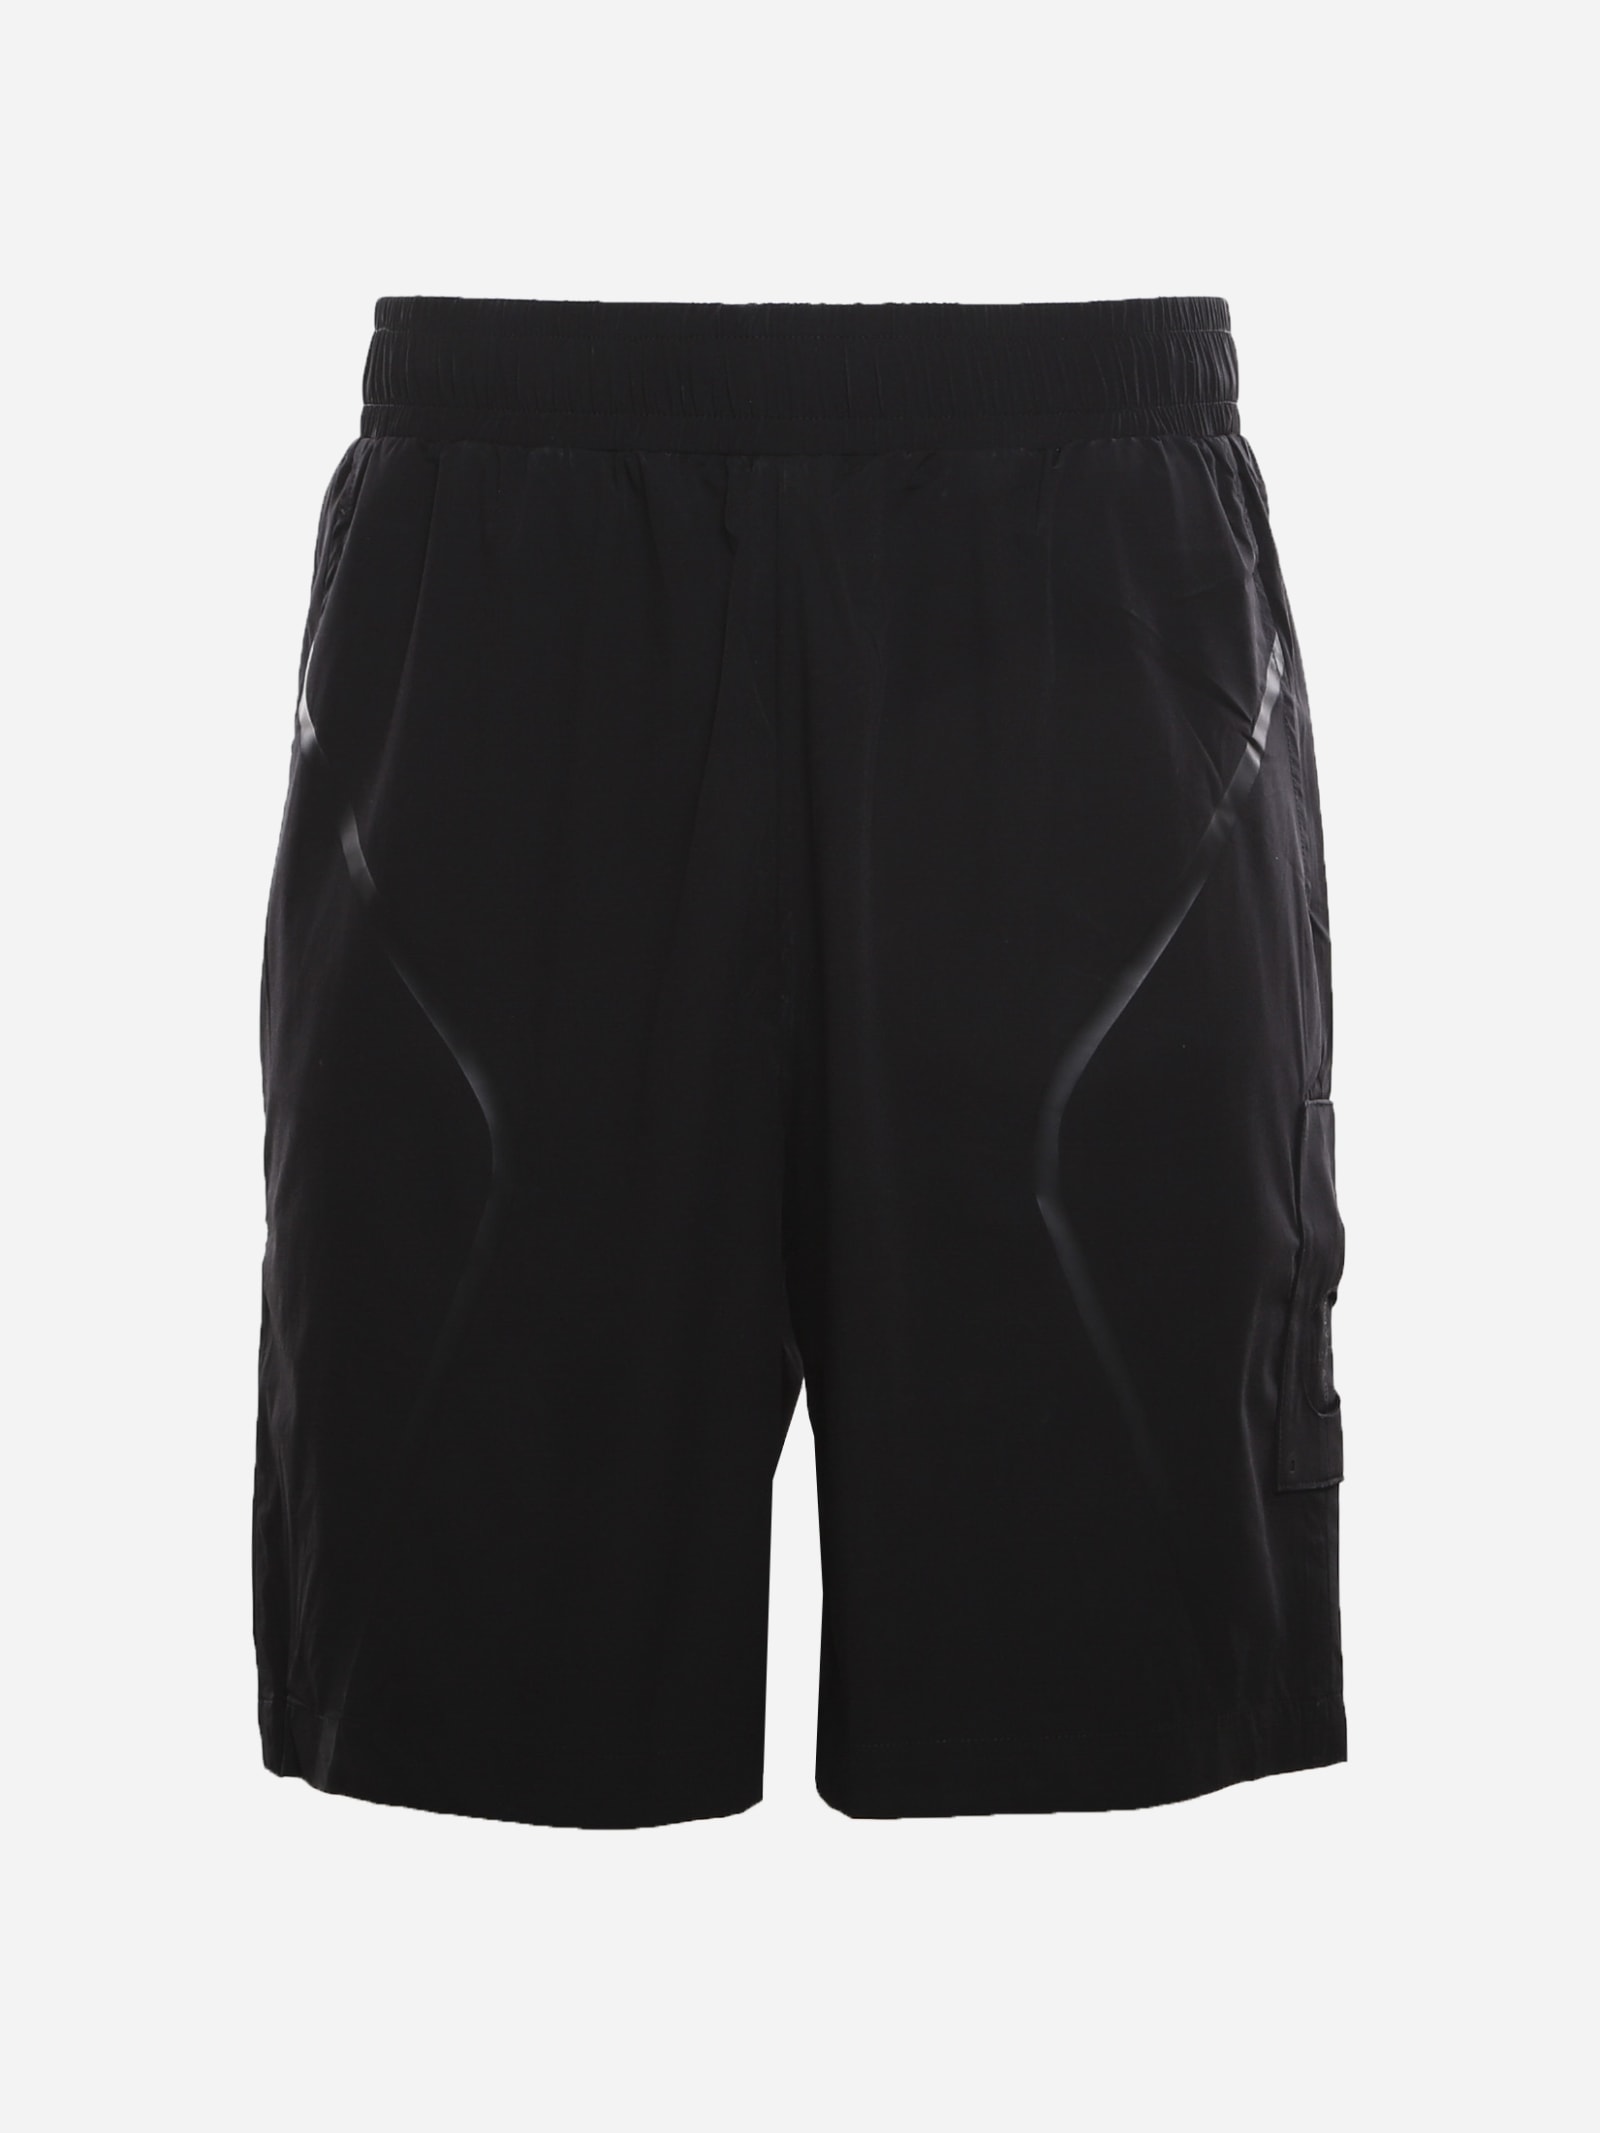 A-COLD-WALL Technical Fabric Shorts With Logo Detail